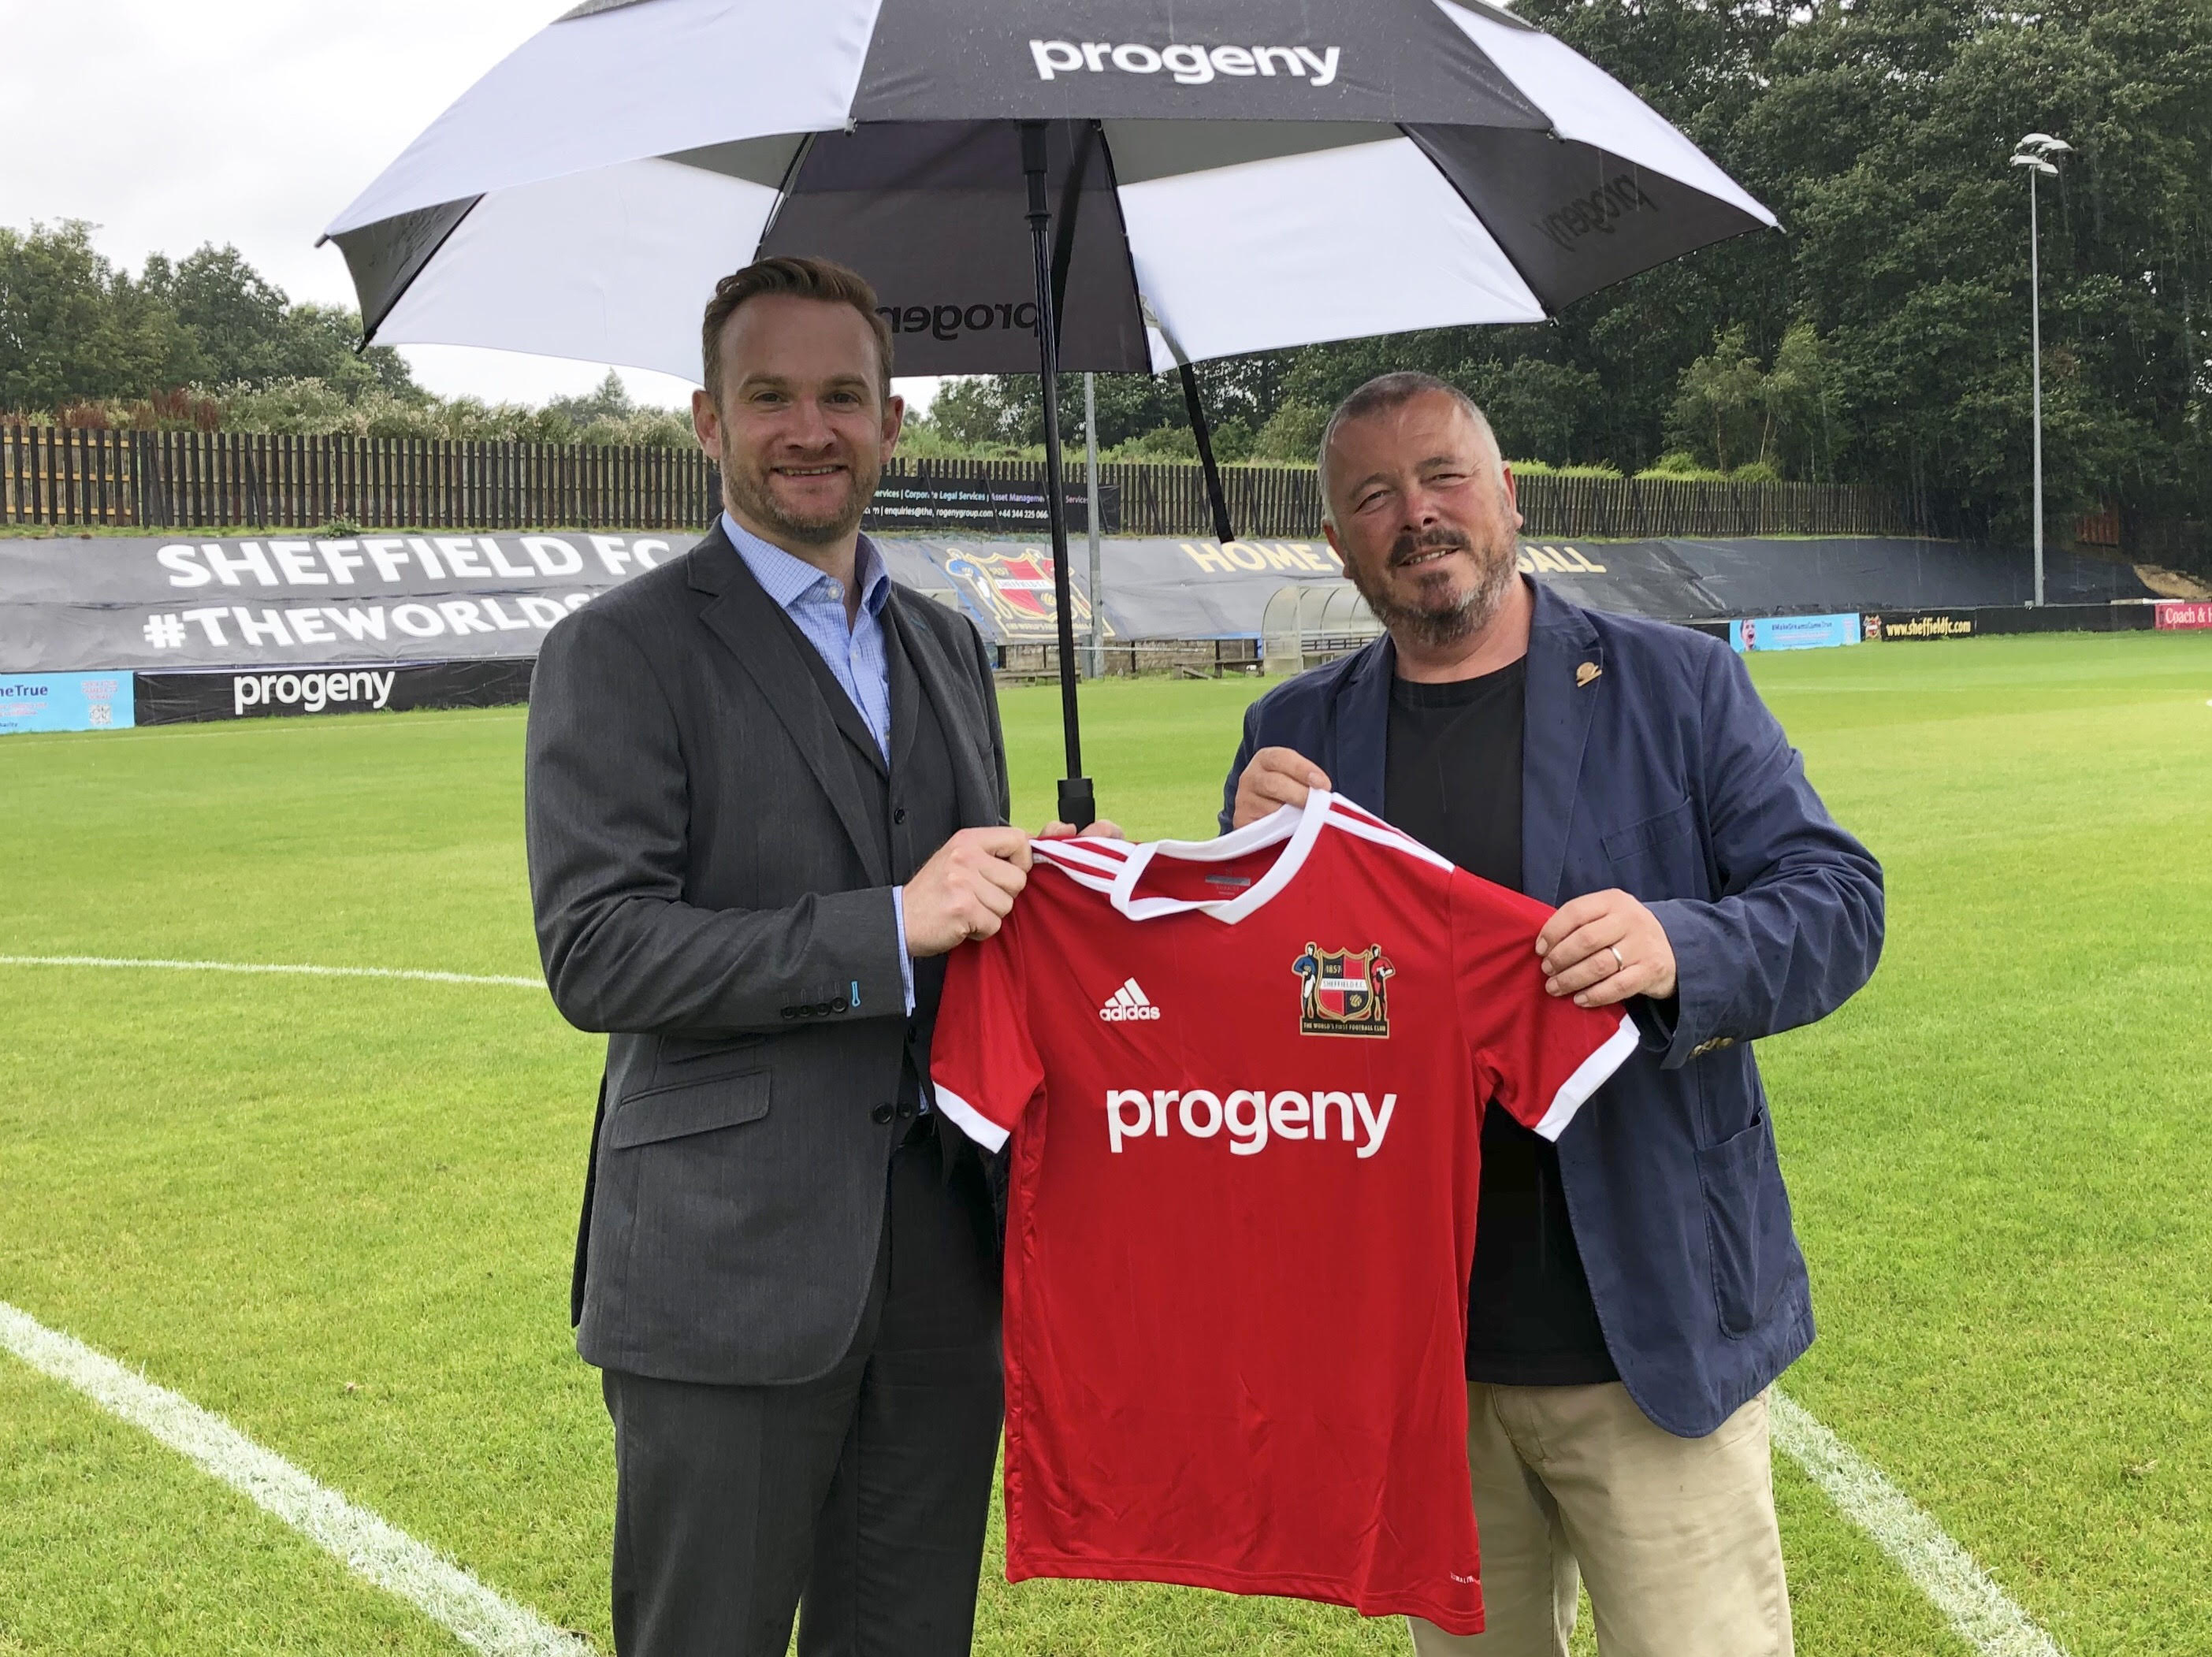 Alex Shaw, Director of Progeny, and Richard Tims, Chairman of Sheffield FC, with the team’s new kit showing Progeny logo